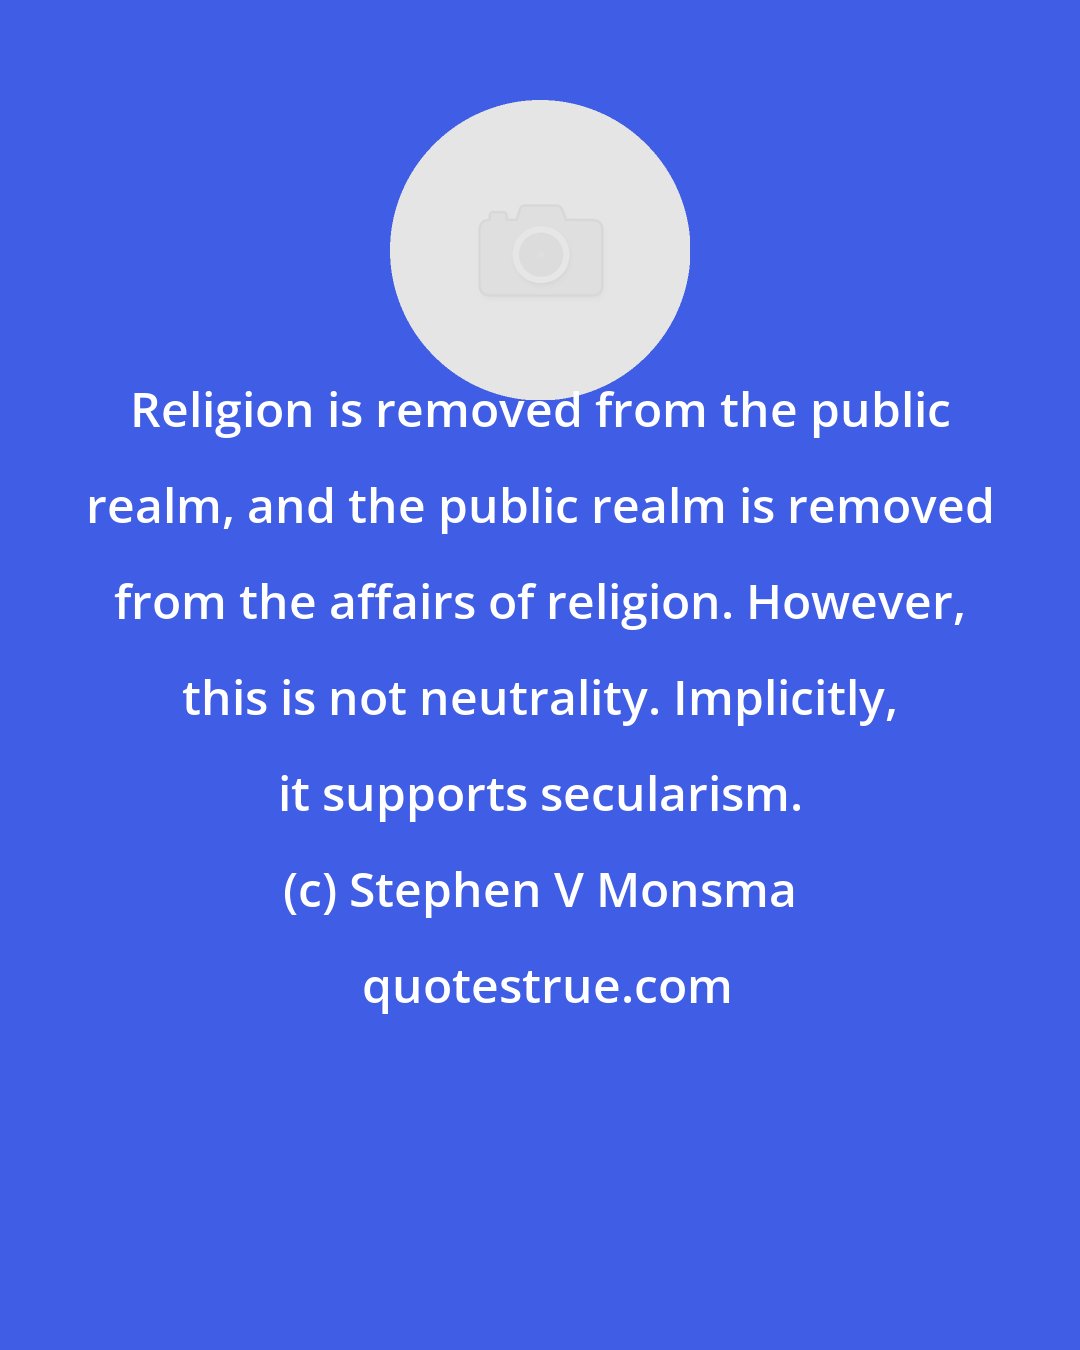 Stephen V Monsma: Religion is removed from the public realm, and the public realm is removed from the affairs of religion. However, this is not neutrality. Implicitly, it supports secularism.